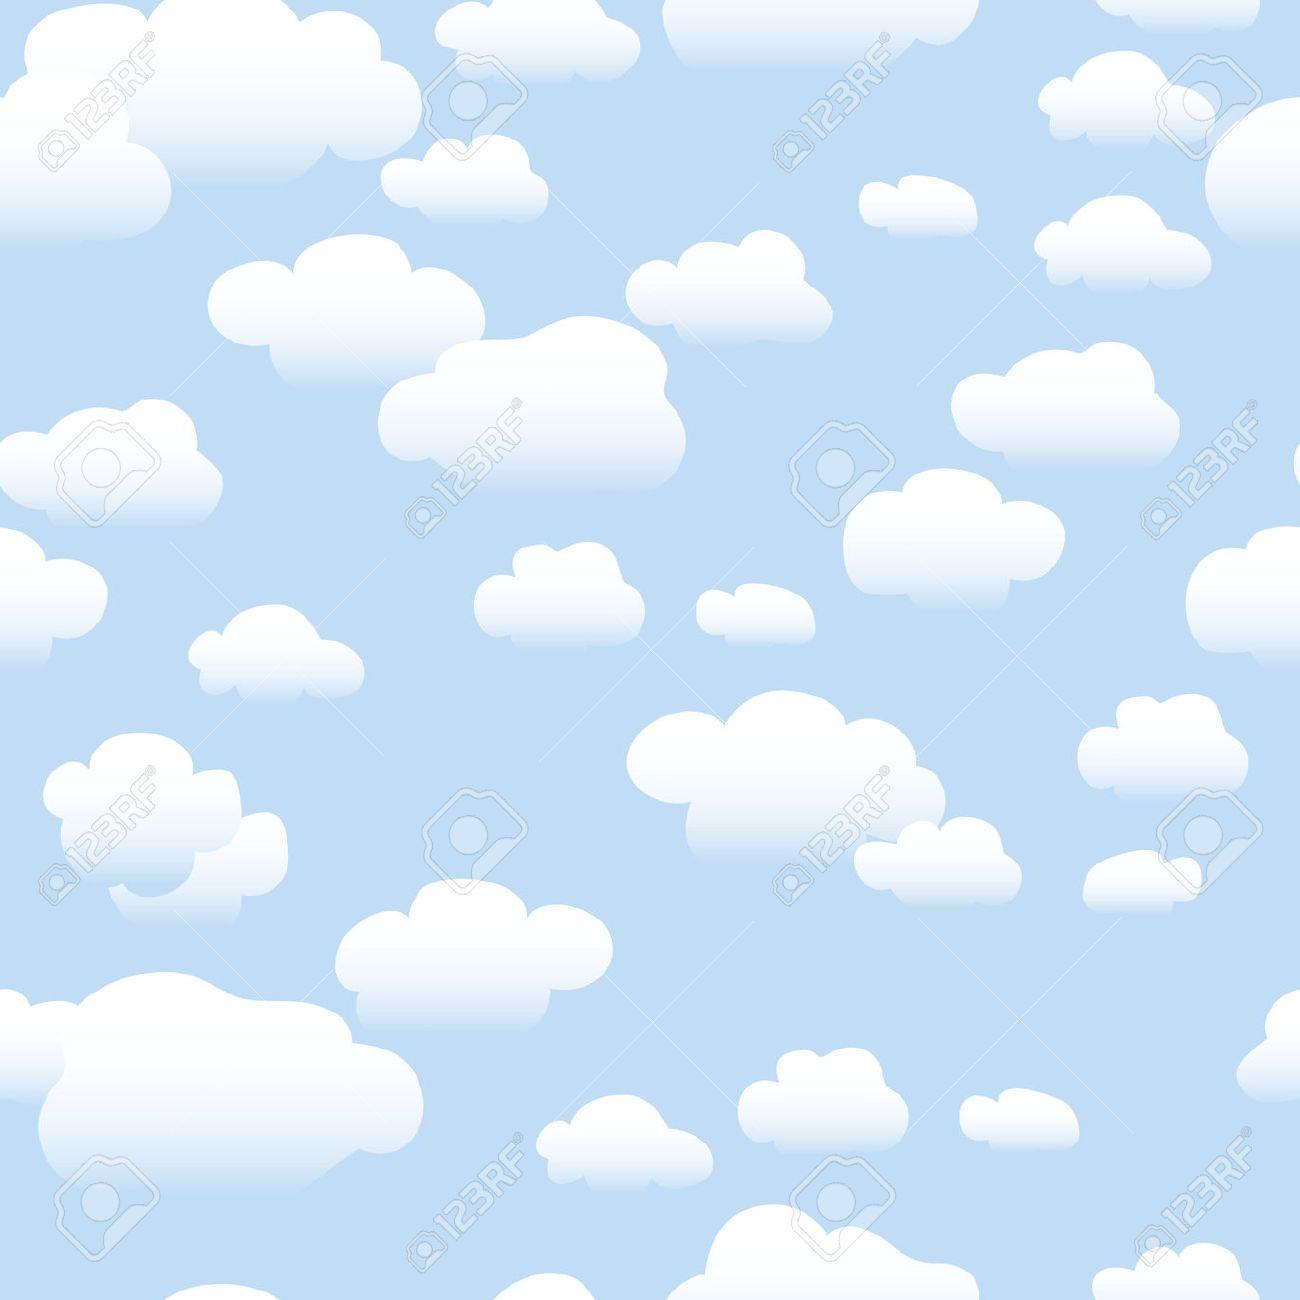 cartoon cloud background 11. Background Check All